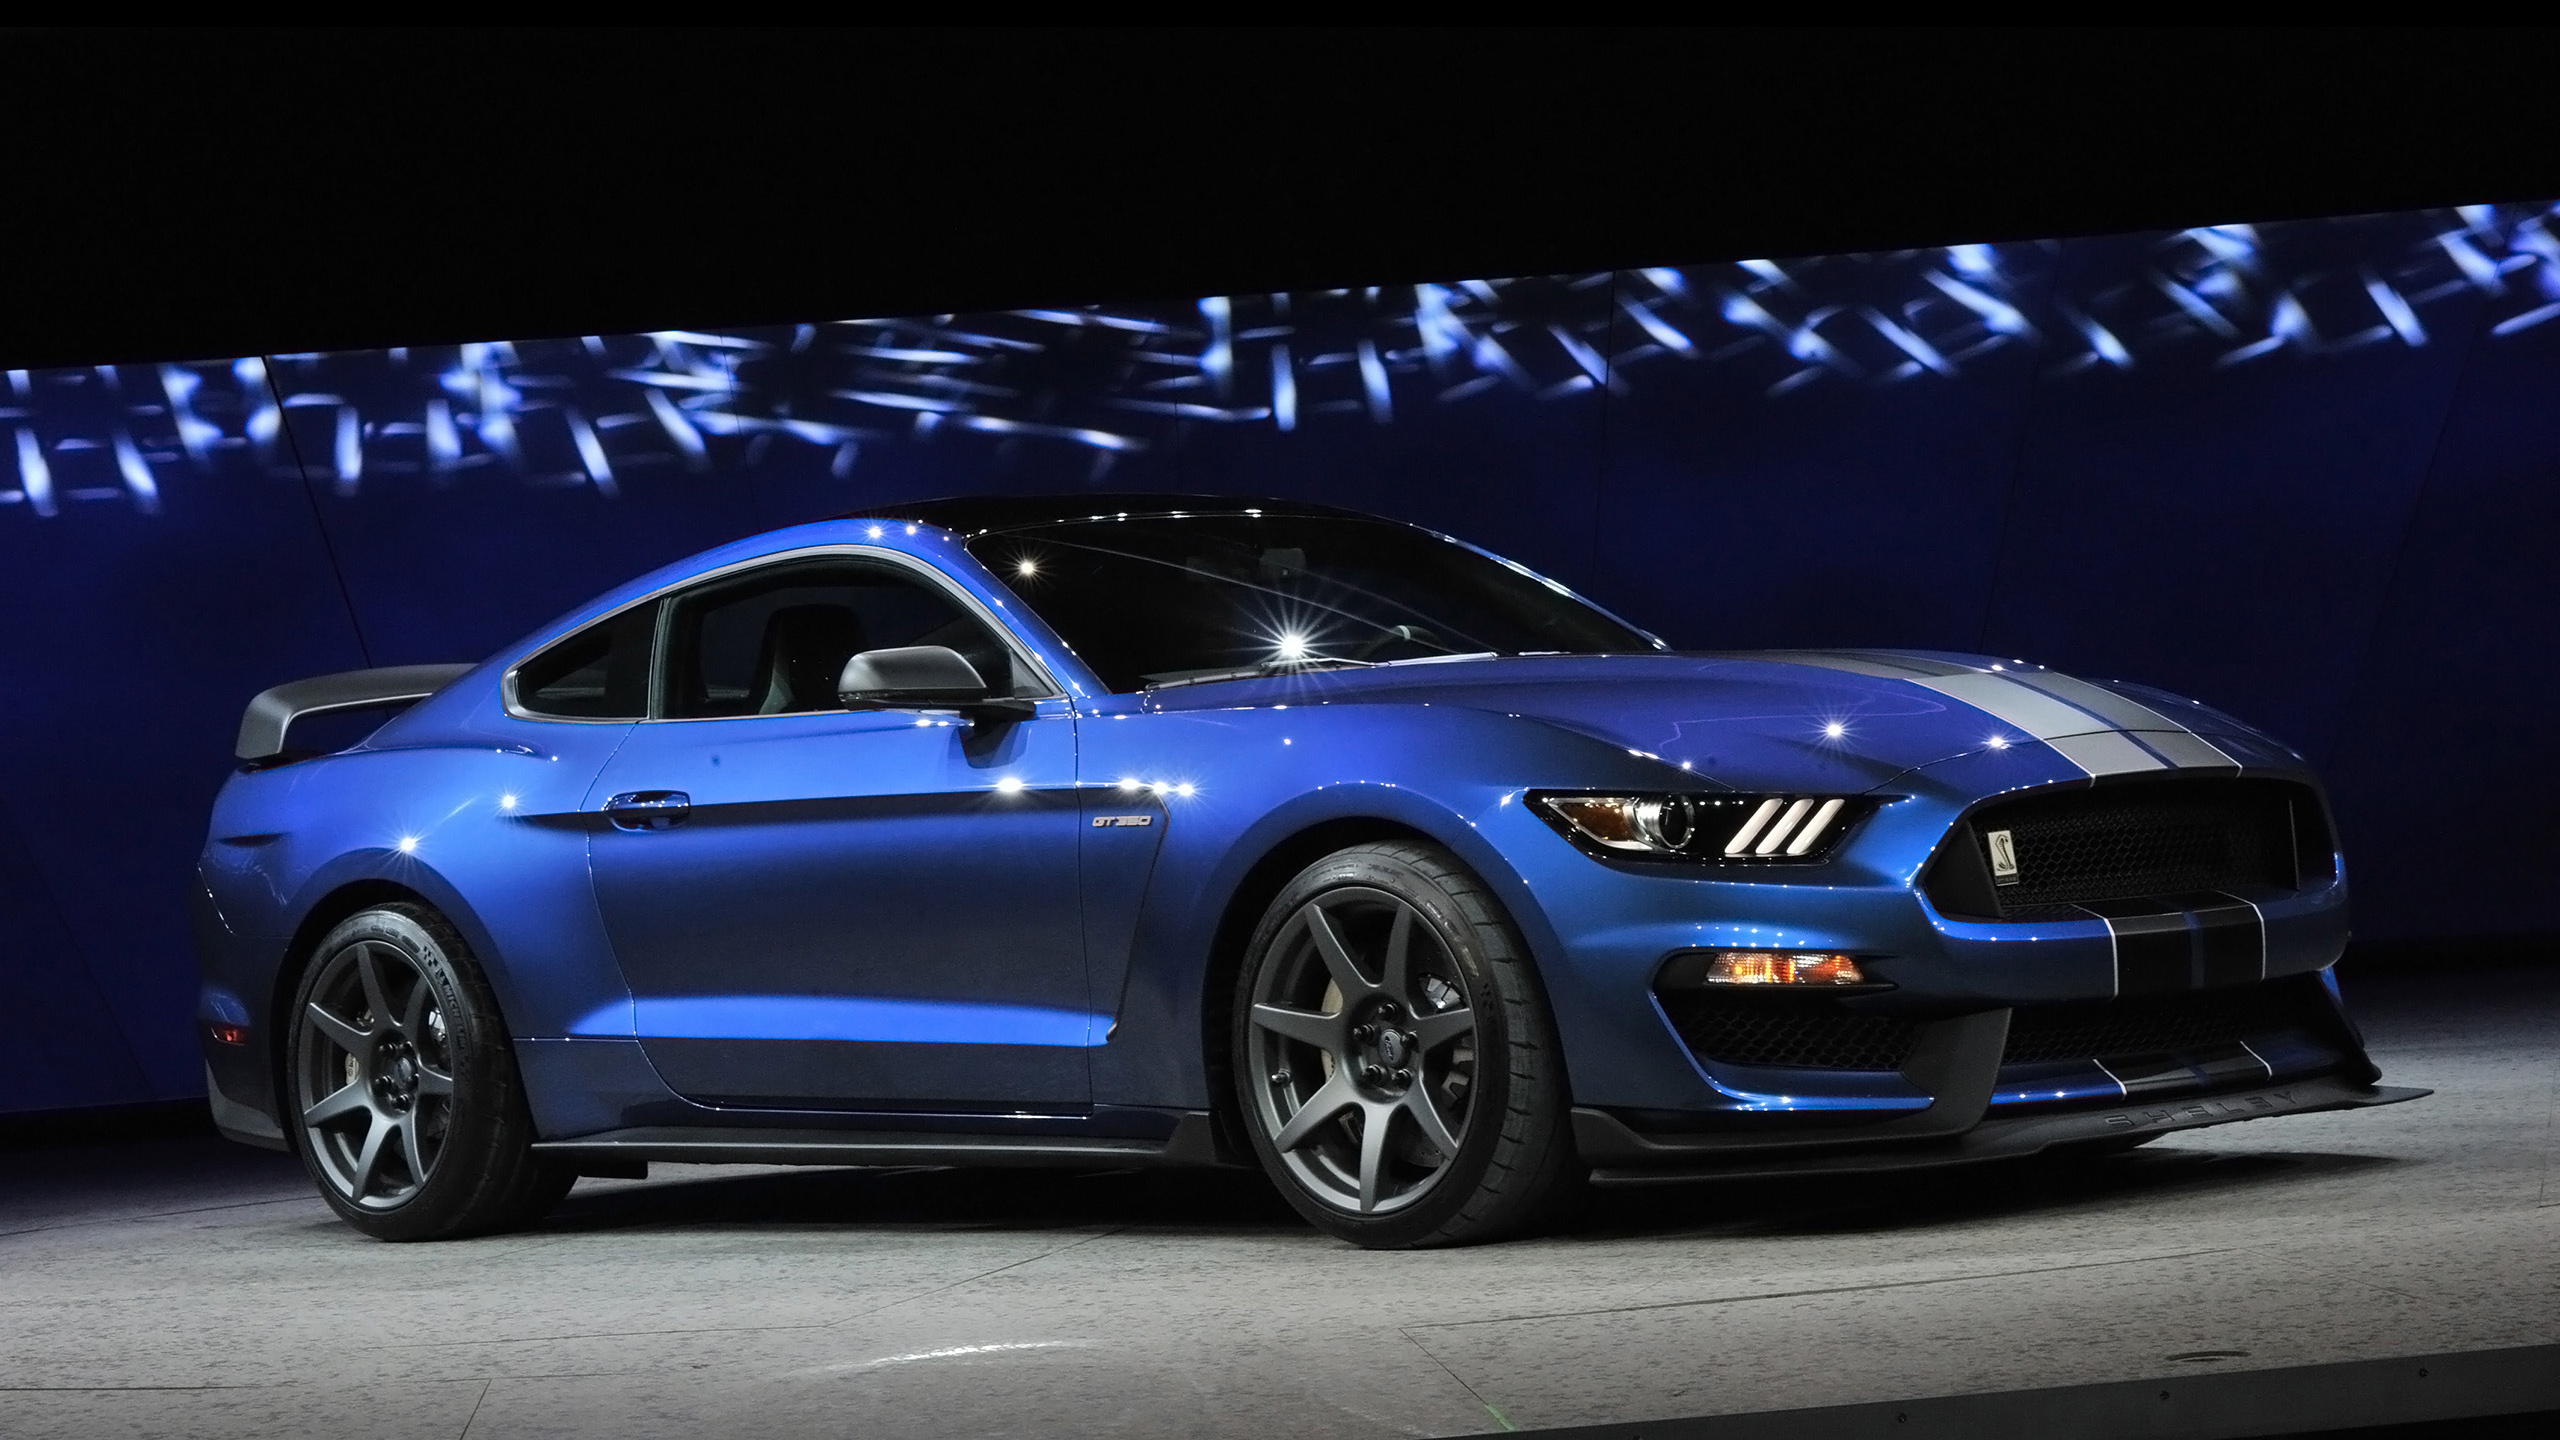 Mustang Gt350r Wallpaper 2016 Ford Shelby Gt350r Mustang - Ford Mustang Shelby Gt350r , HD Wallpaper & Backgrounds